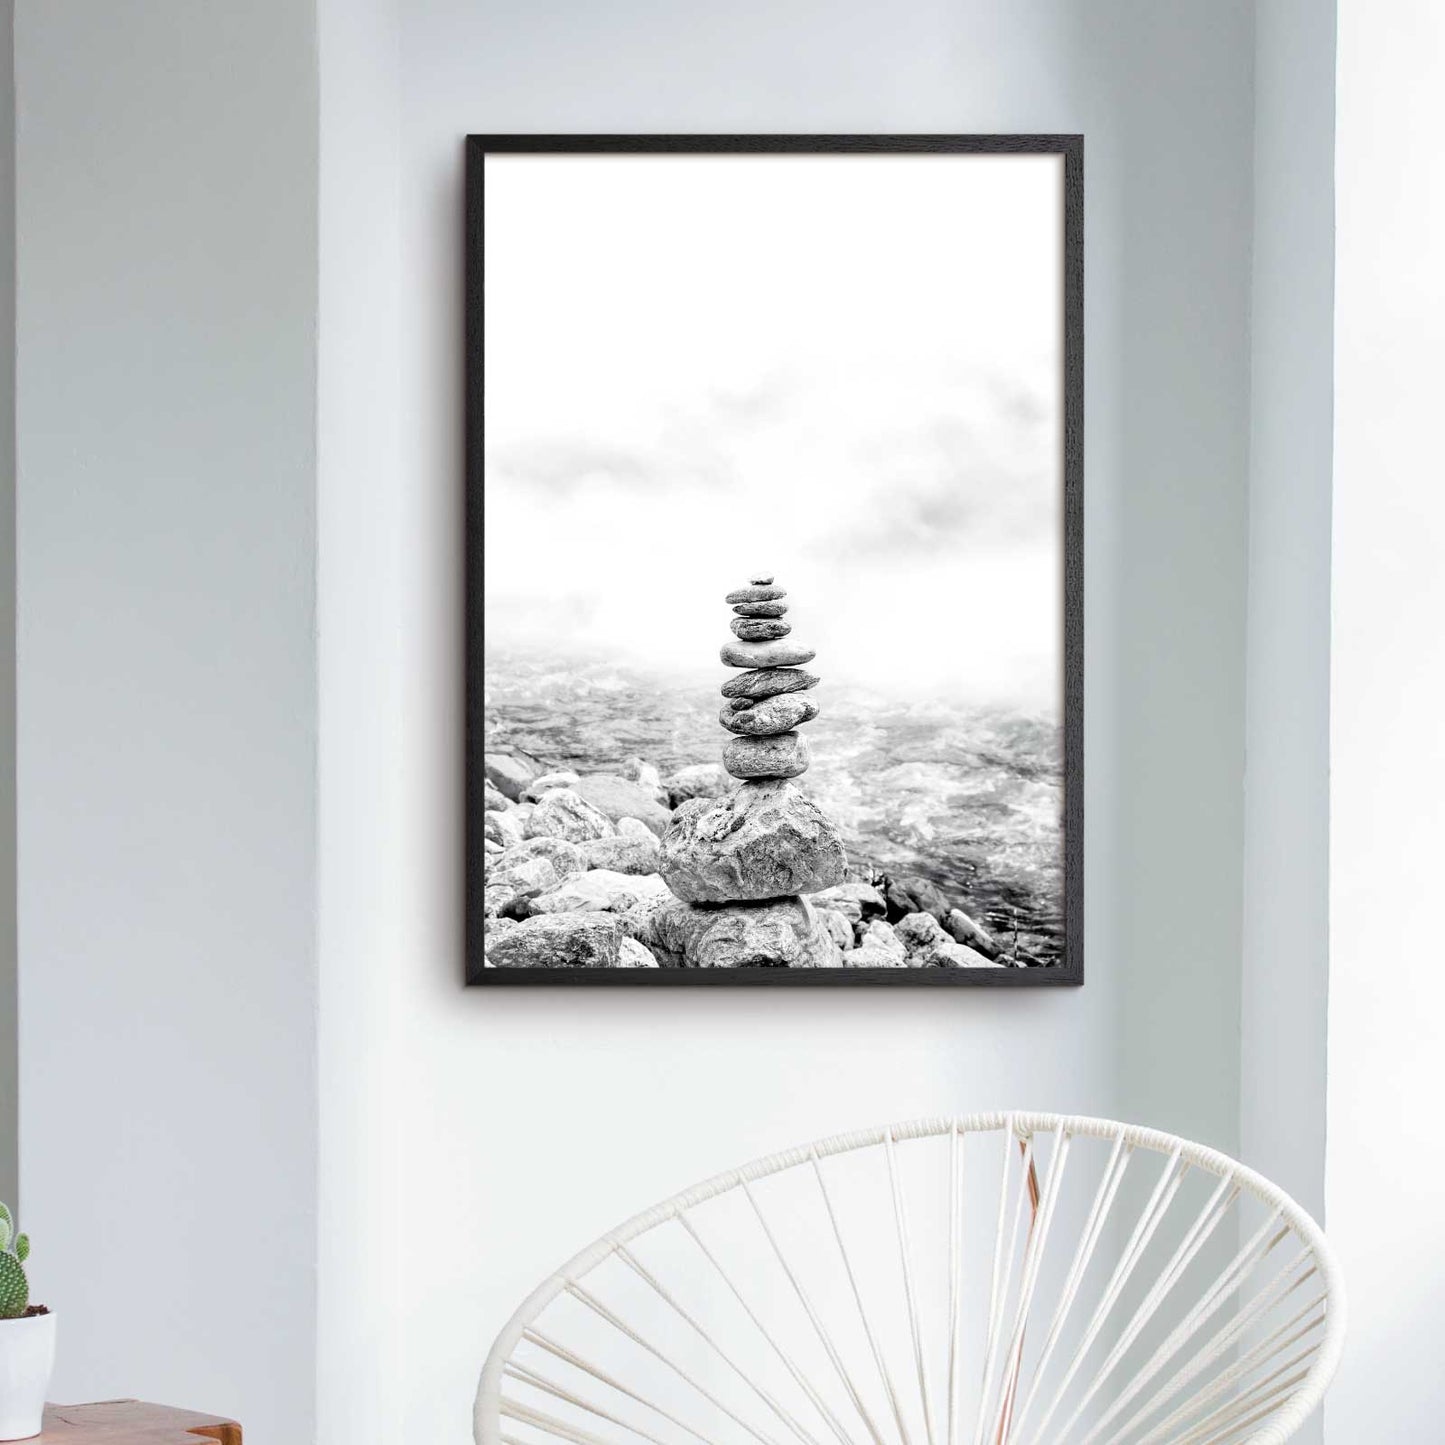 Black and white mindfulness poster with small stone tower